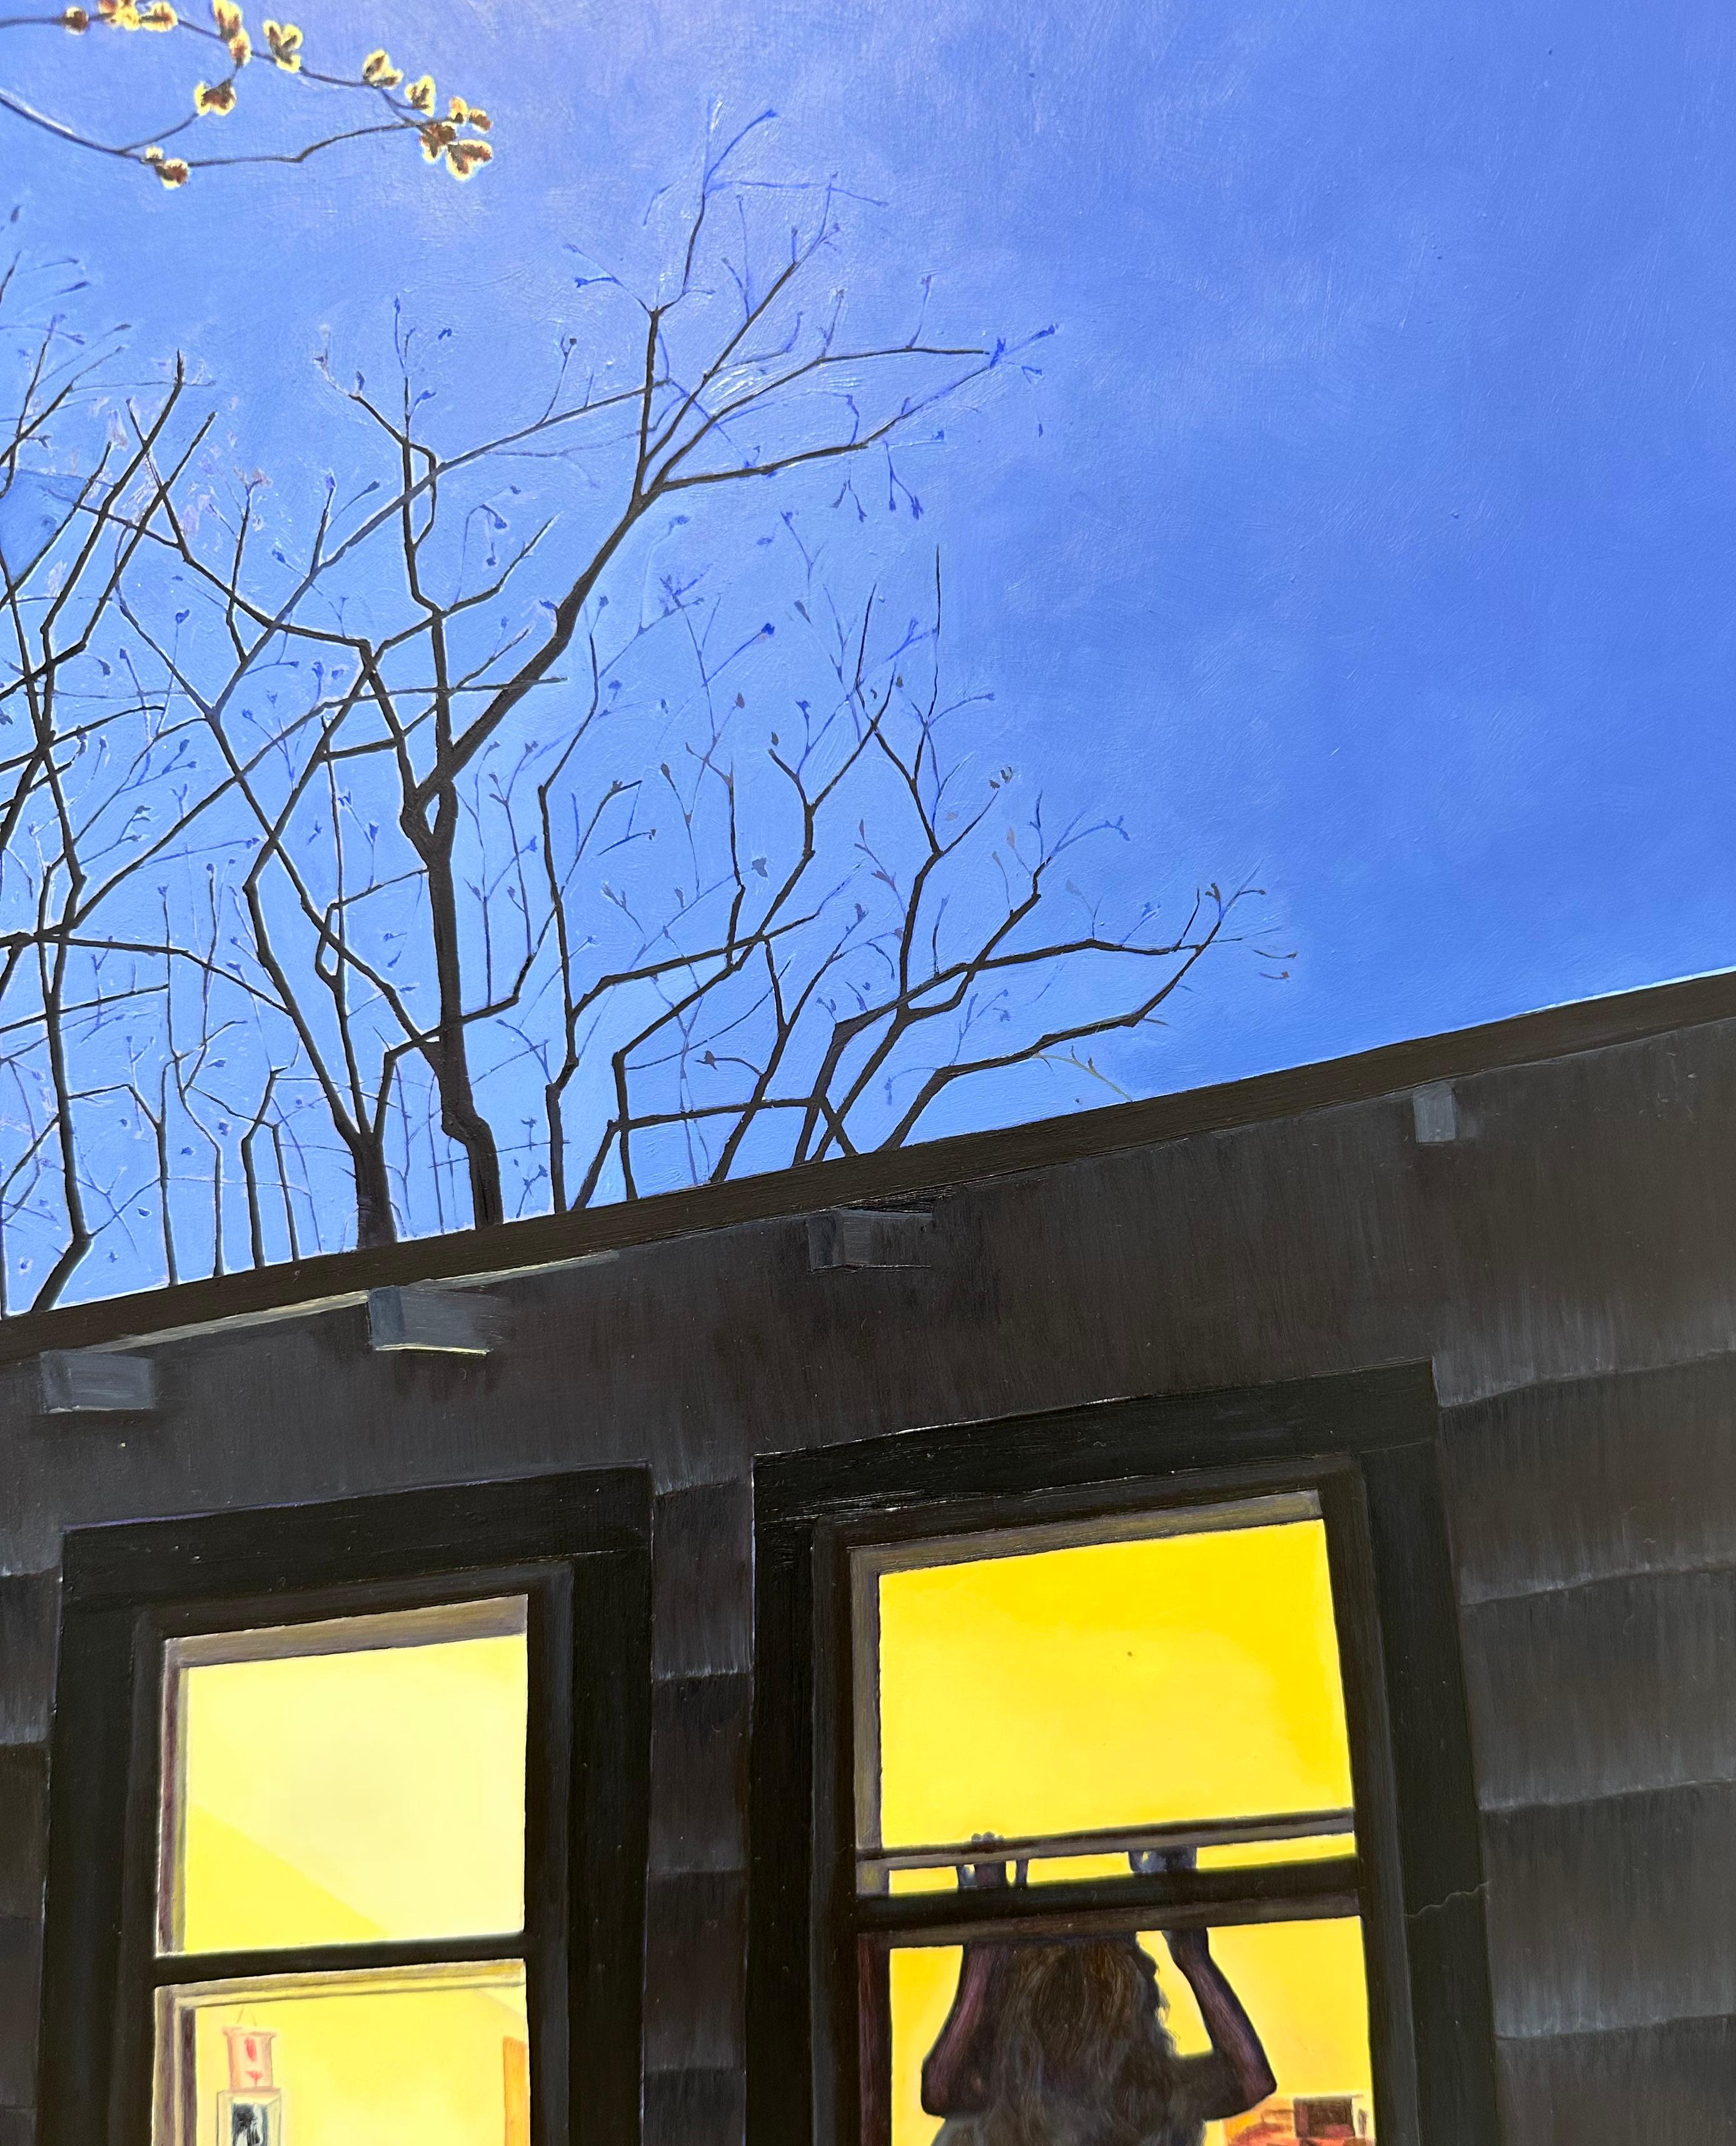 Spring Chill, Female Figure in Window, House at Night, Blue, Black Tree Branches - Contemporary Painting by Amanda Acker